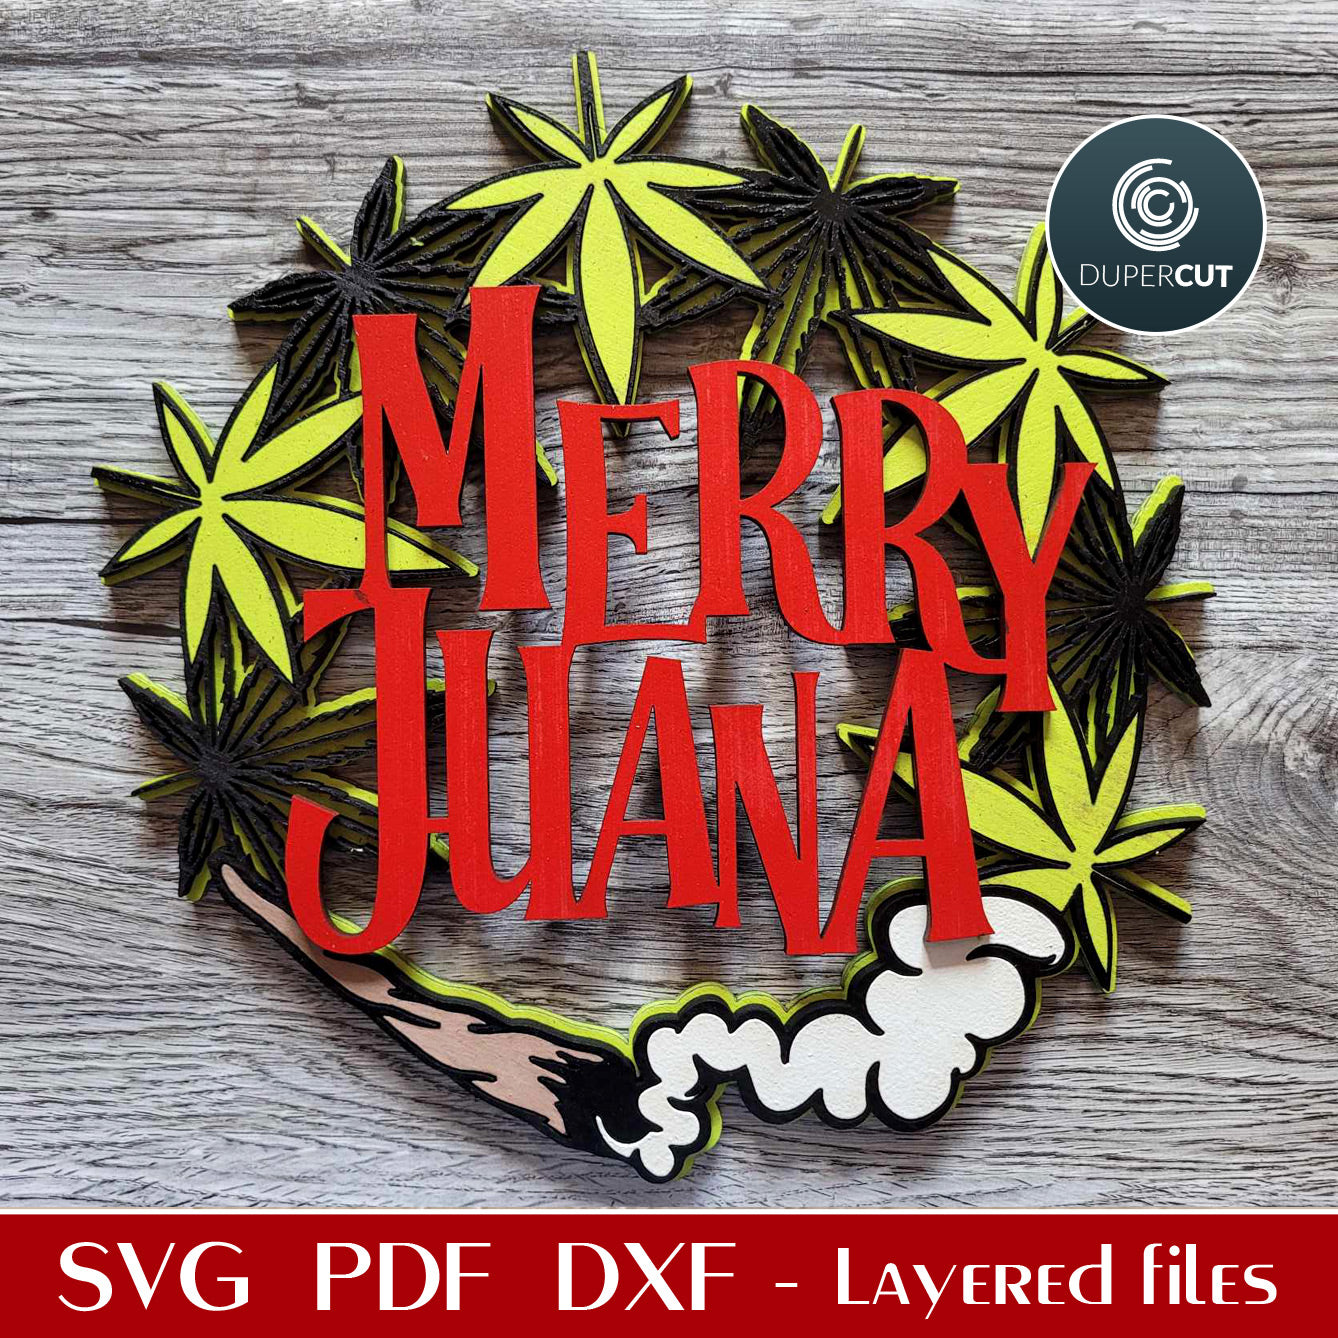 Funny cannabis weed MERRY JUANA door hanger sign - SVG DXF vector files for laser cutting, Glowforge, Cricut, X-tool, CNC plasma machines, scroll saw pattern by www.DuperCut.com